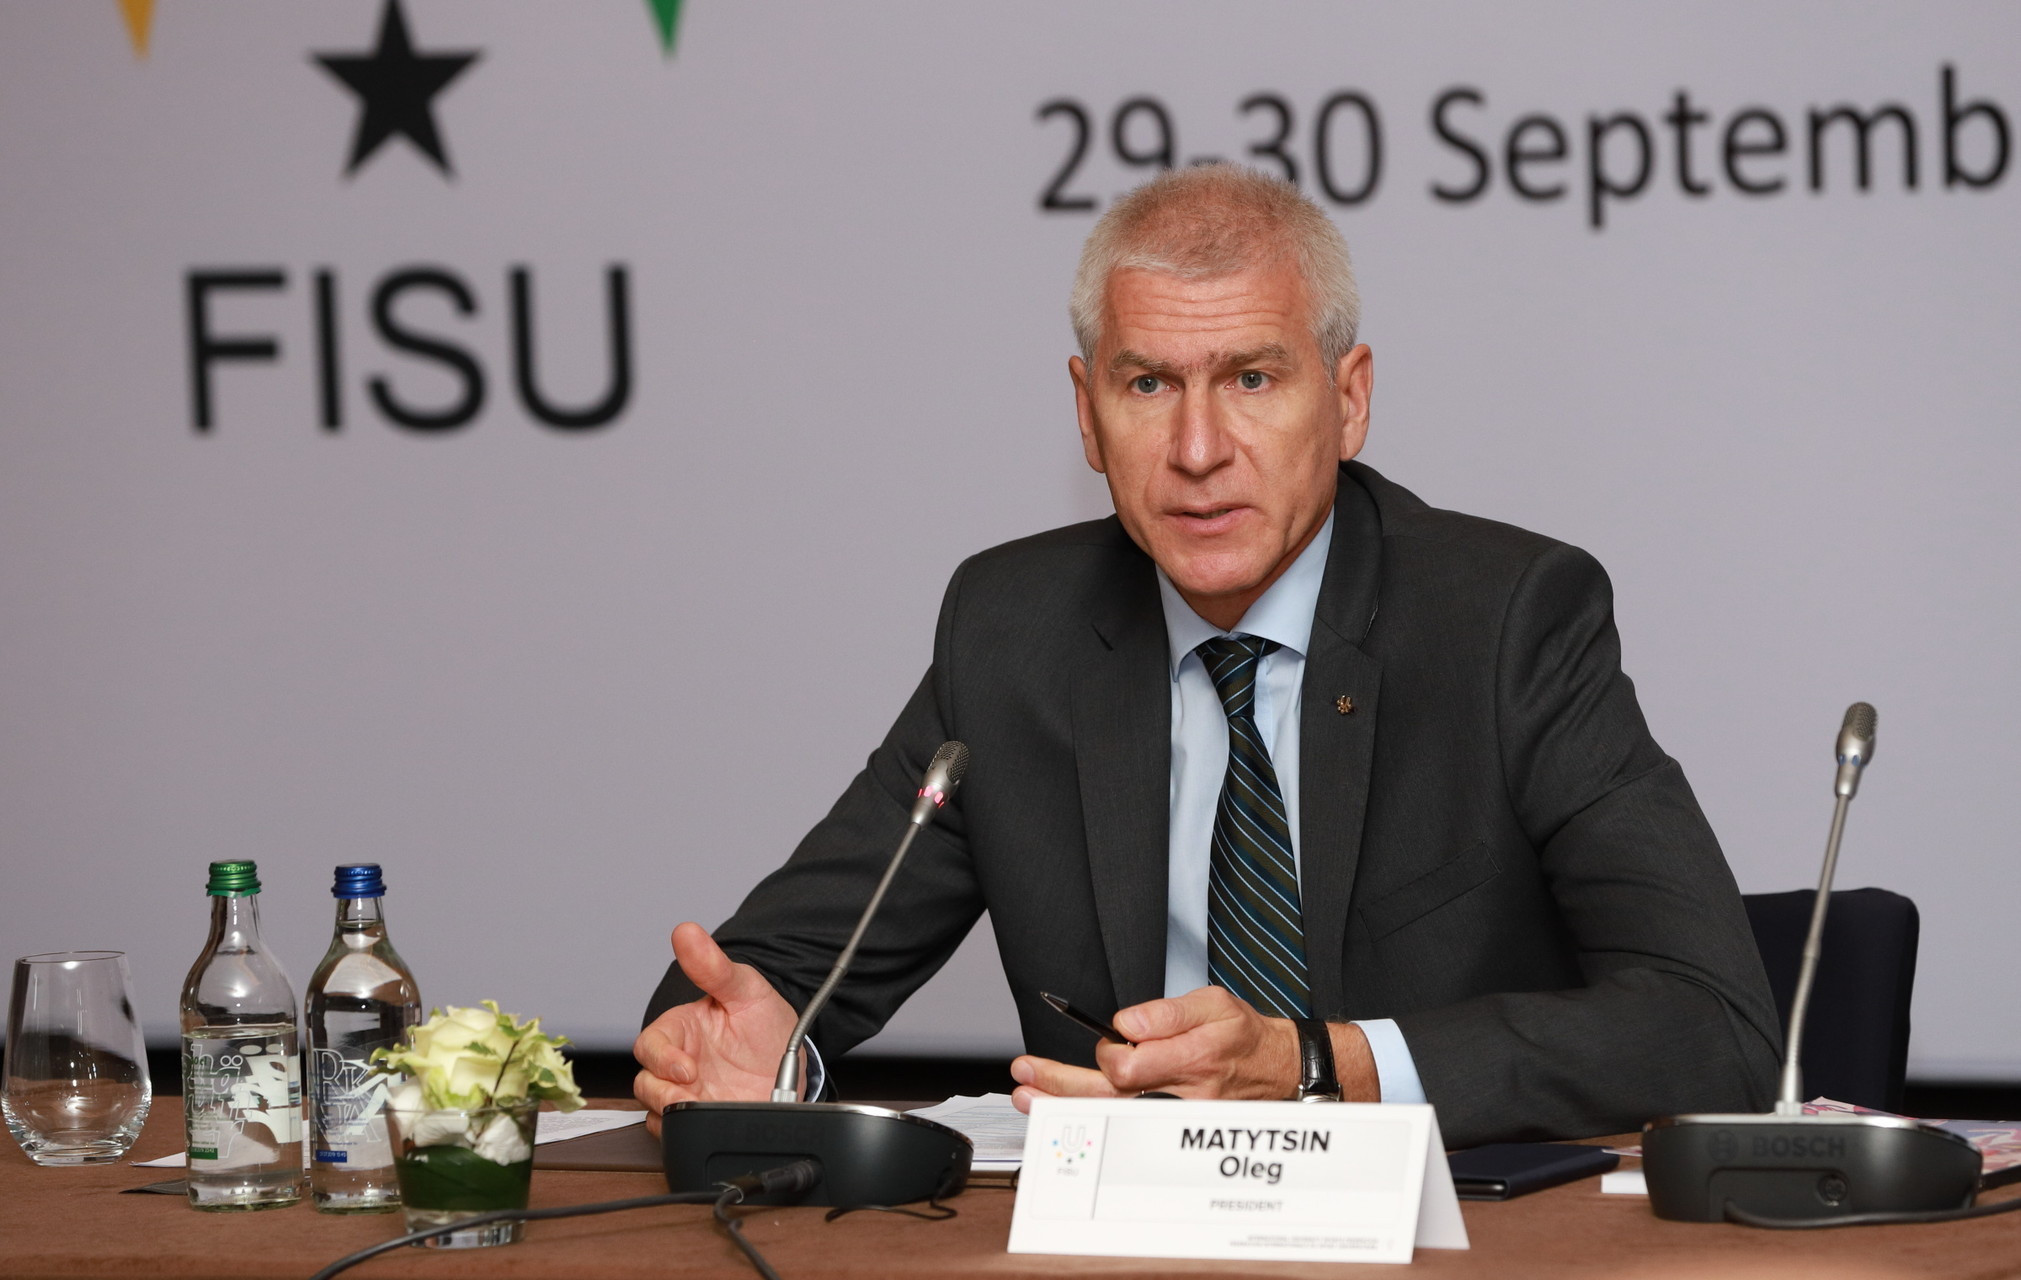 Exclusive: Matytsin term as FISU President could be extended until 2025 if resolution adopted